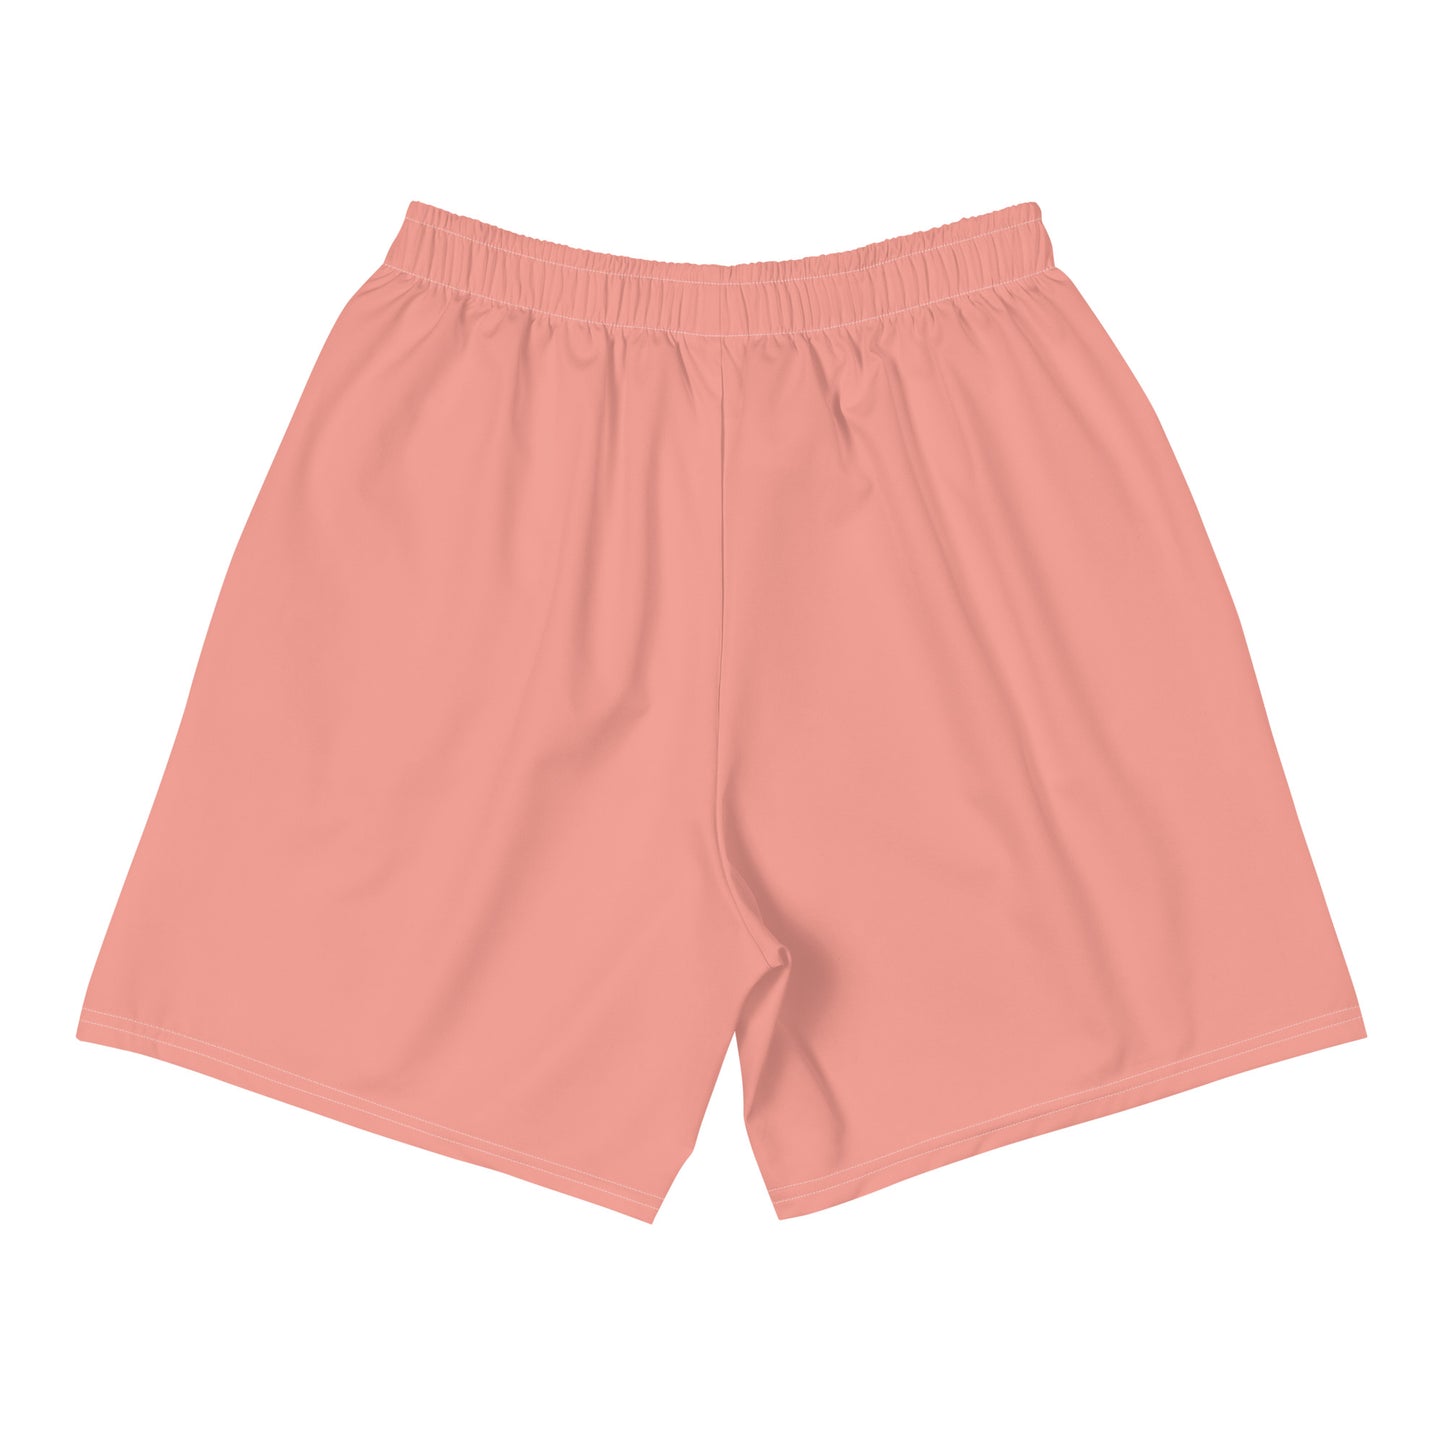 Coral Pink Climate Change Global Warming Statement - Sustainably Made Men's Recycled Athletic Shorts